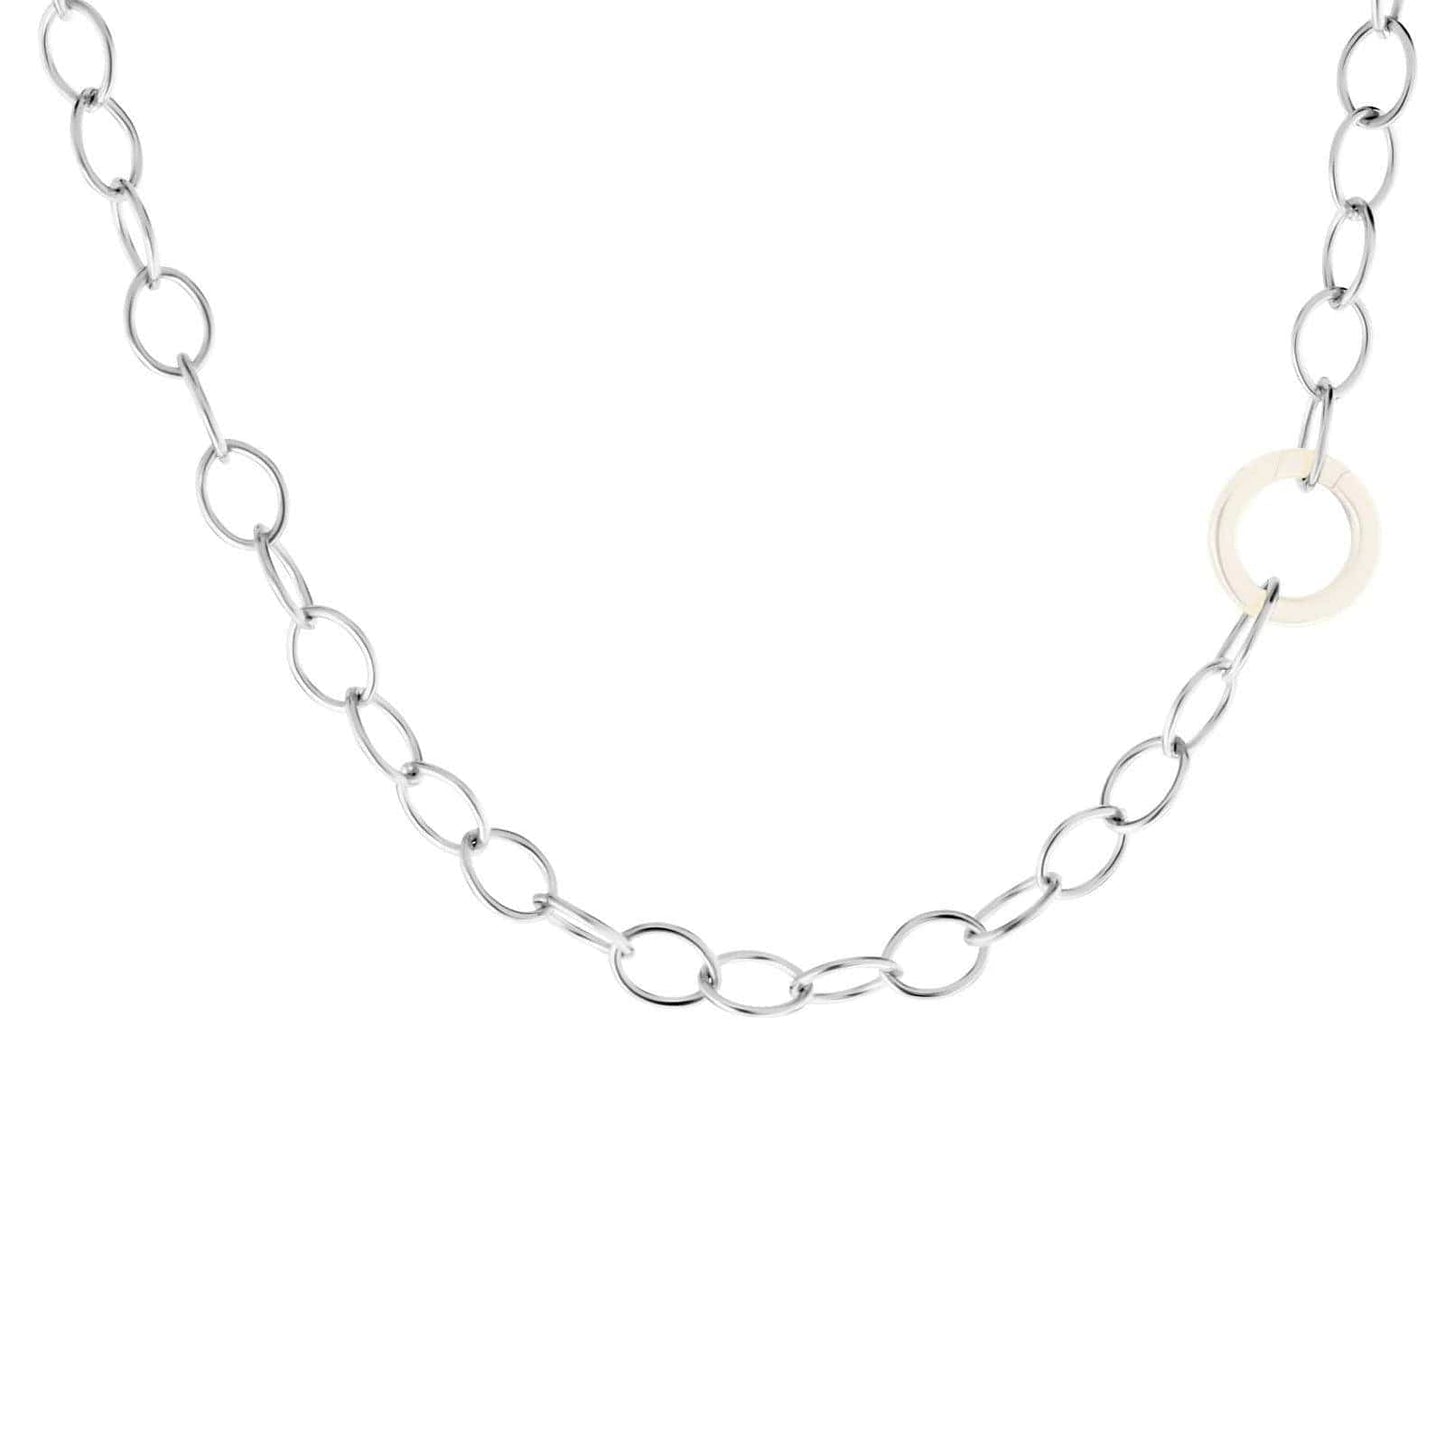 CHN 6.3mm Silver Chain With Clasp - No Hinge